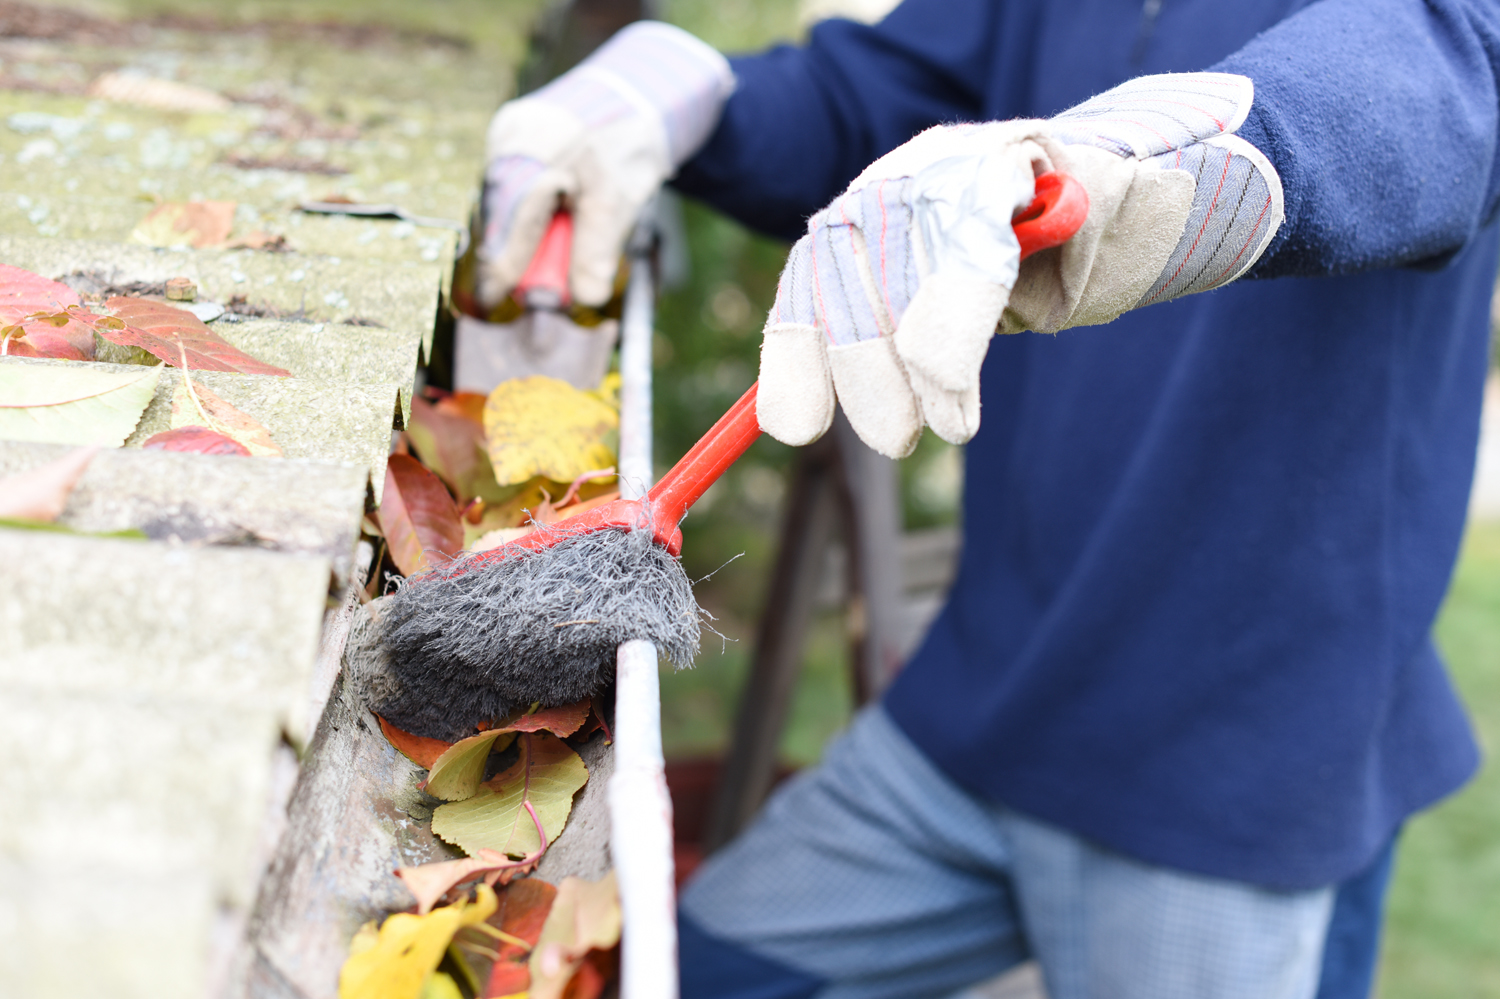 09 East Grand Rapids Michigan Gutter Cleaning Services